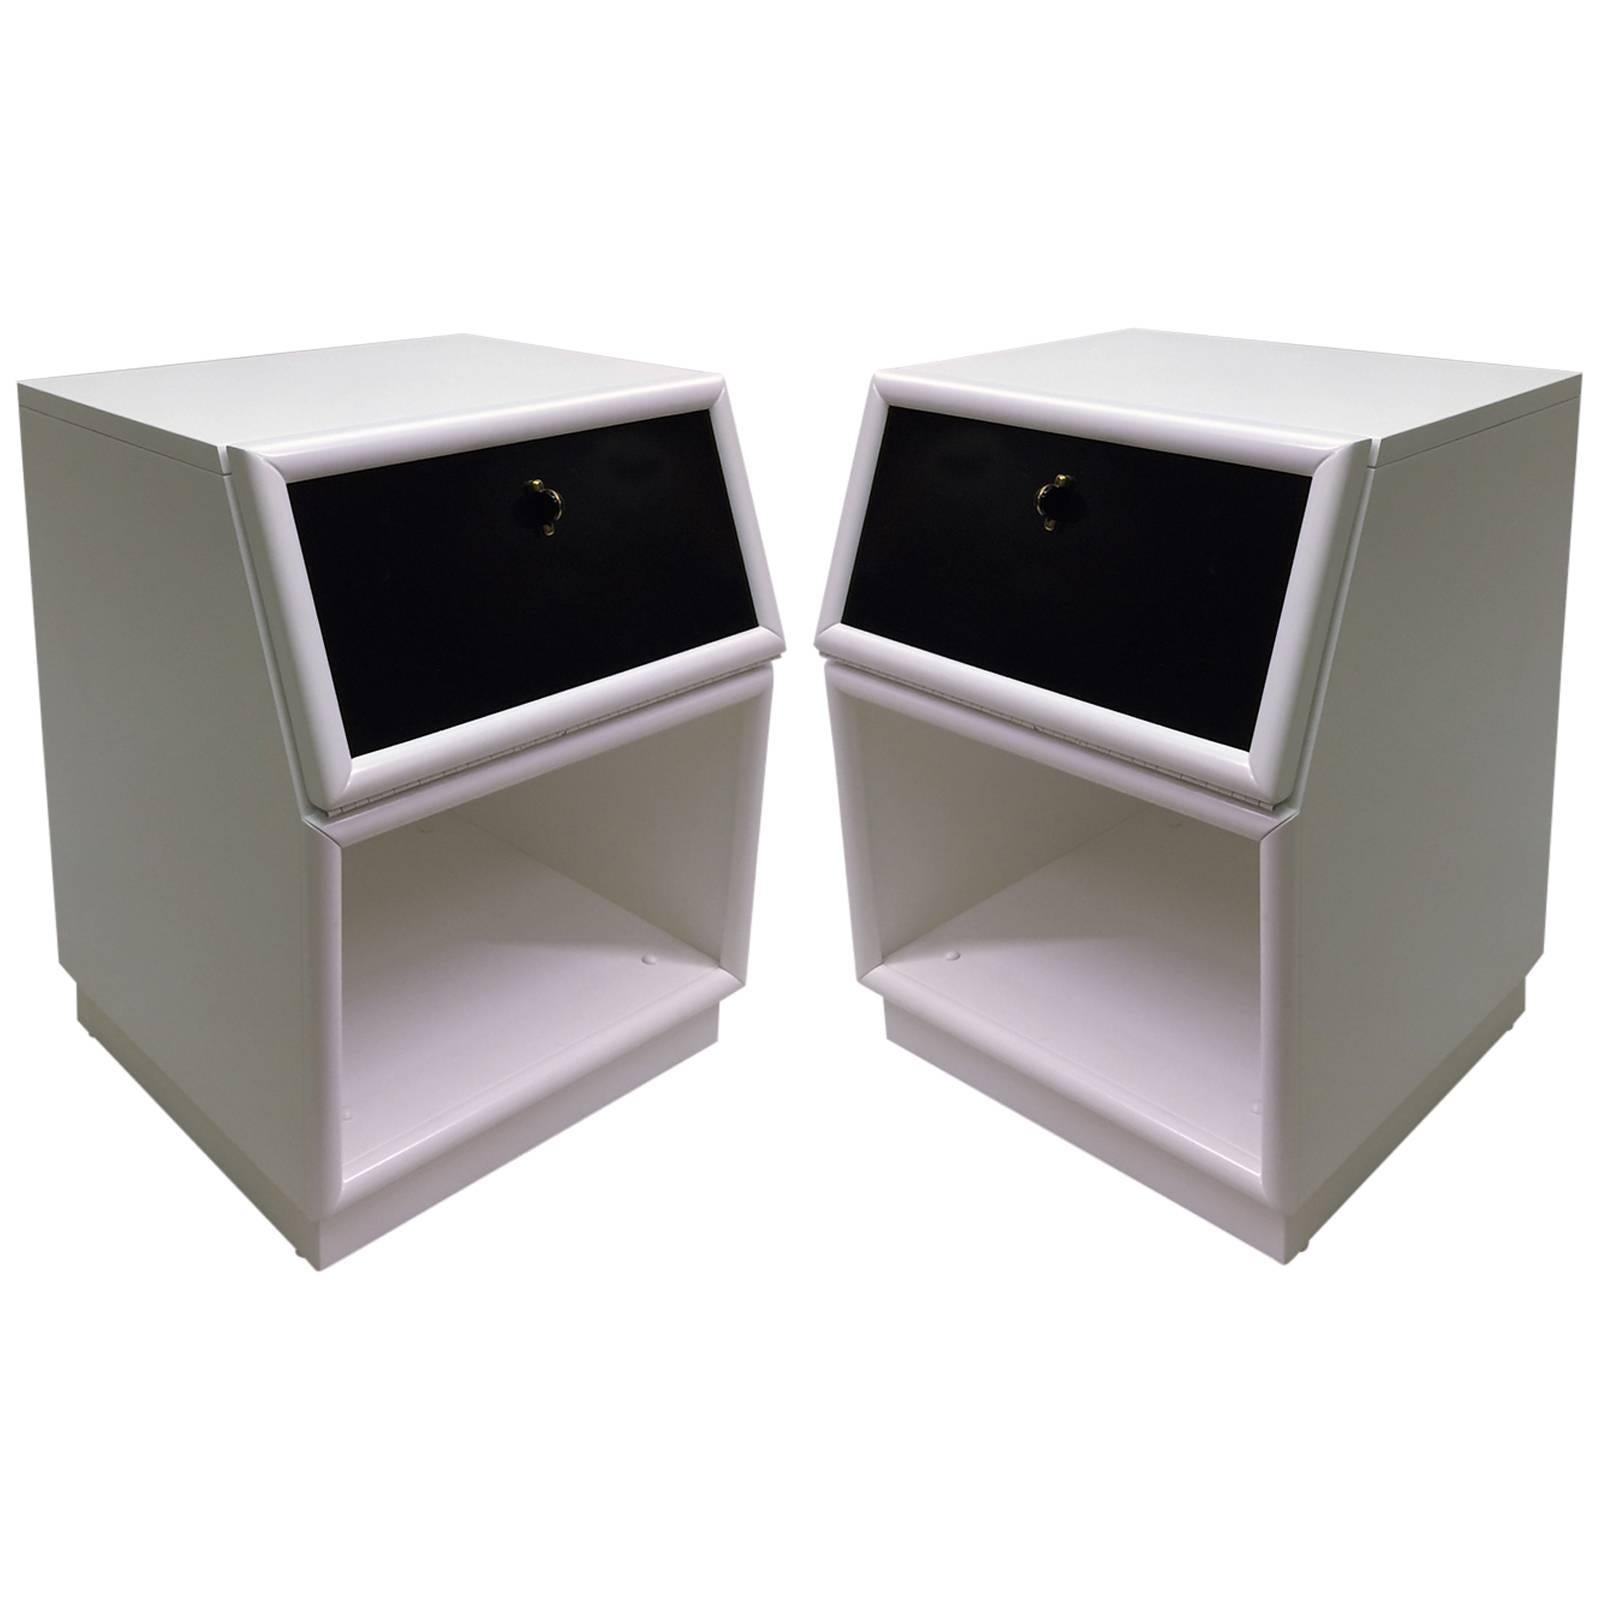 This matching pair of white lacquer nightstands features a black lacquer drop-front surface, which also provides storage when closed. Each unit has a black enamel and brass knob. They are well crafted by an excellent manufacturer named Henredon.